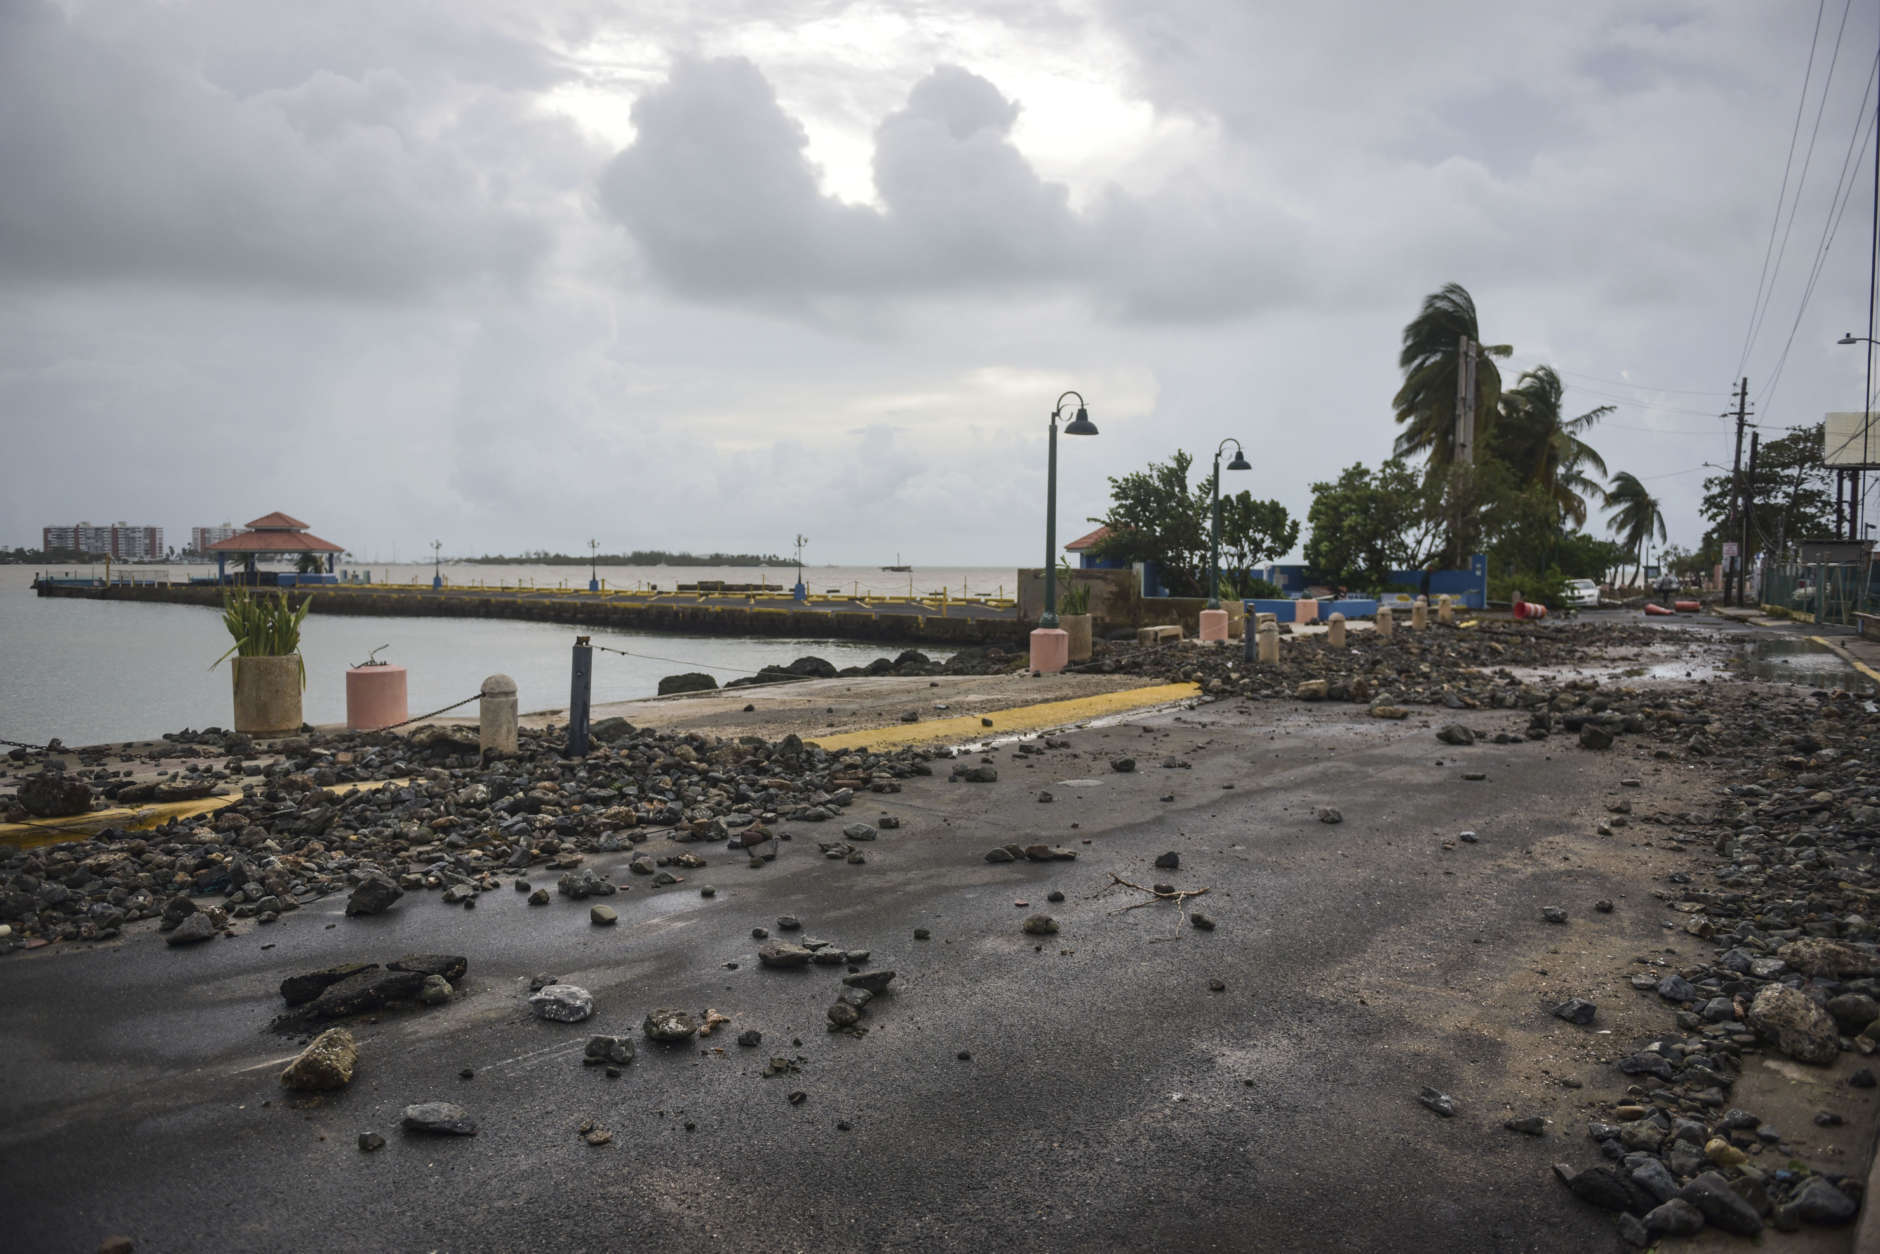 Rocks are scattered on a road in the aftermath of Hurricane Irma, in Fajardo, Puerto Rico, Thursday, Sept. 7, 2017. Irma cut a path of devastation across the northern Caribbean, leaving at least 10 dead and thousands homeless after destroying buildings and uprooting trees. More than 1 million people in Puerto Rico are without power. (AP Photo/Carlos Giusti)